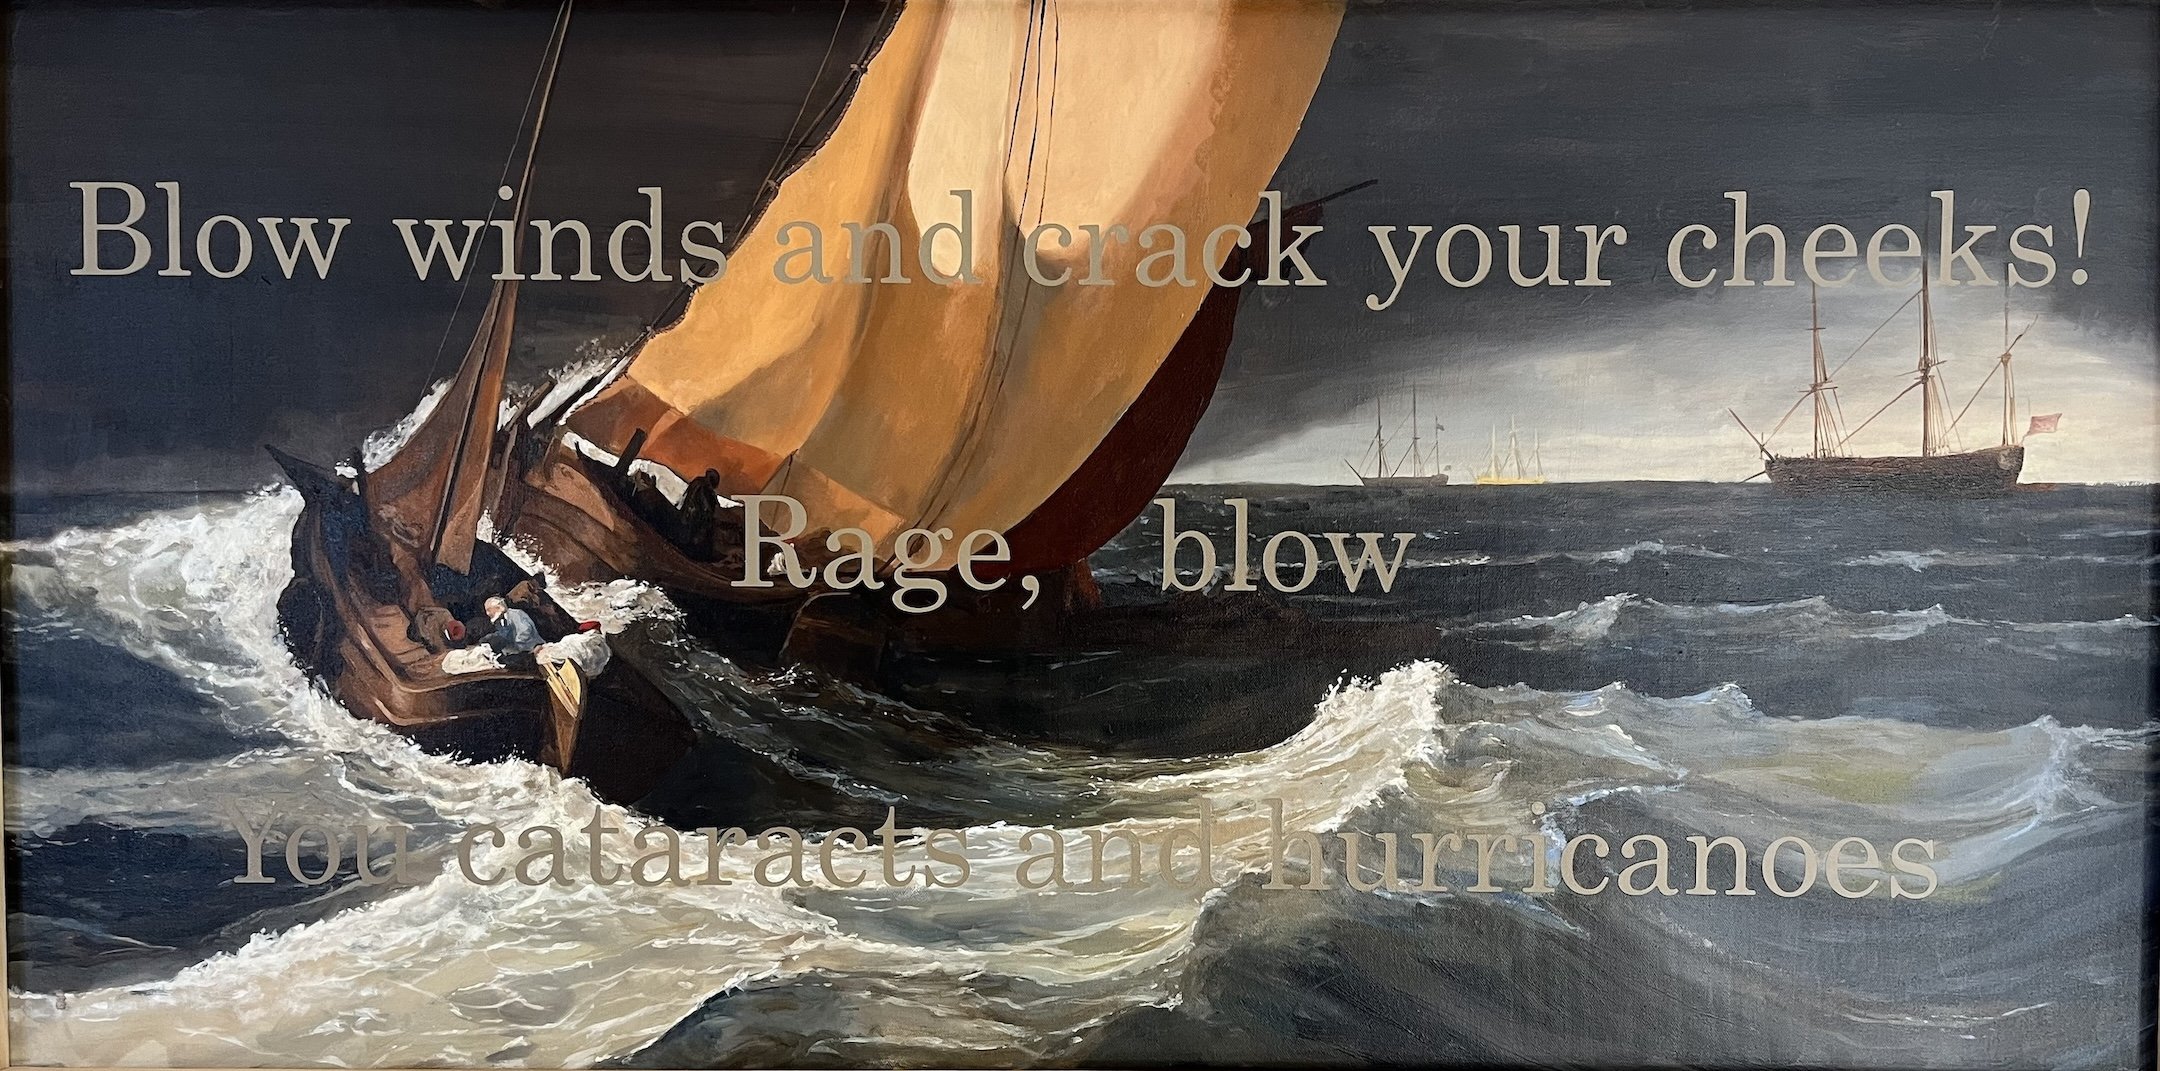    Blow winds and crack your cheeks: After JMW Turner  , oil on canvas, 24" x 48" 